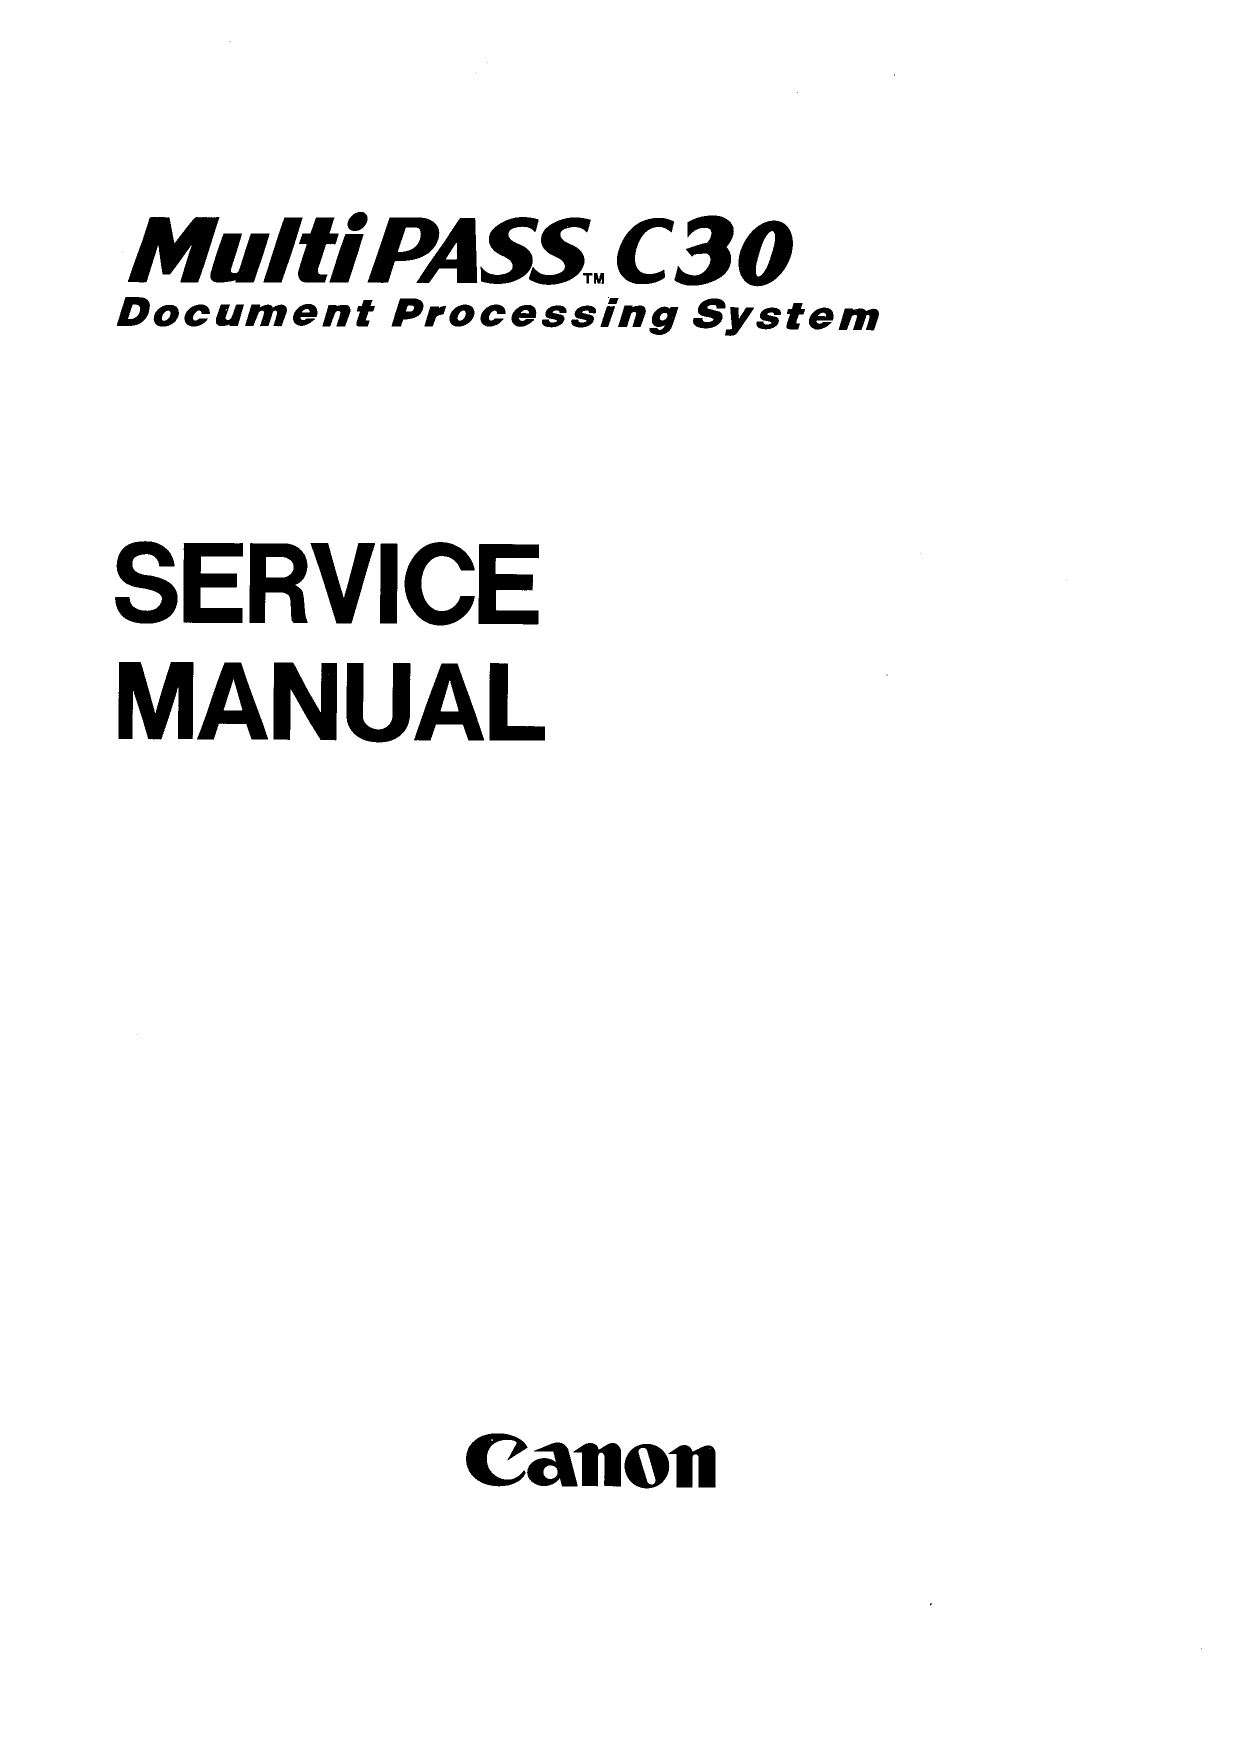 Canon FAX MultiPass-C30 Parts and Service Manual-1